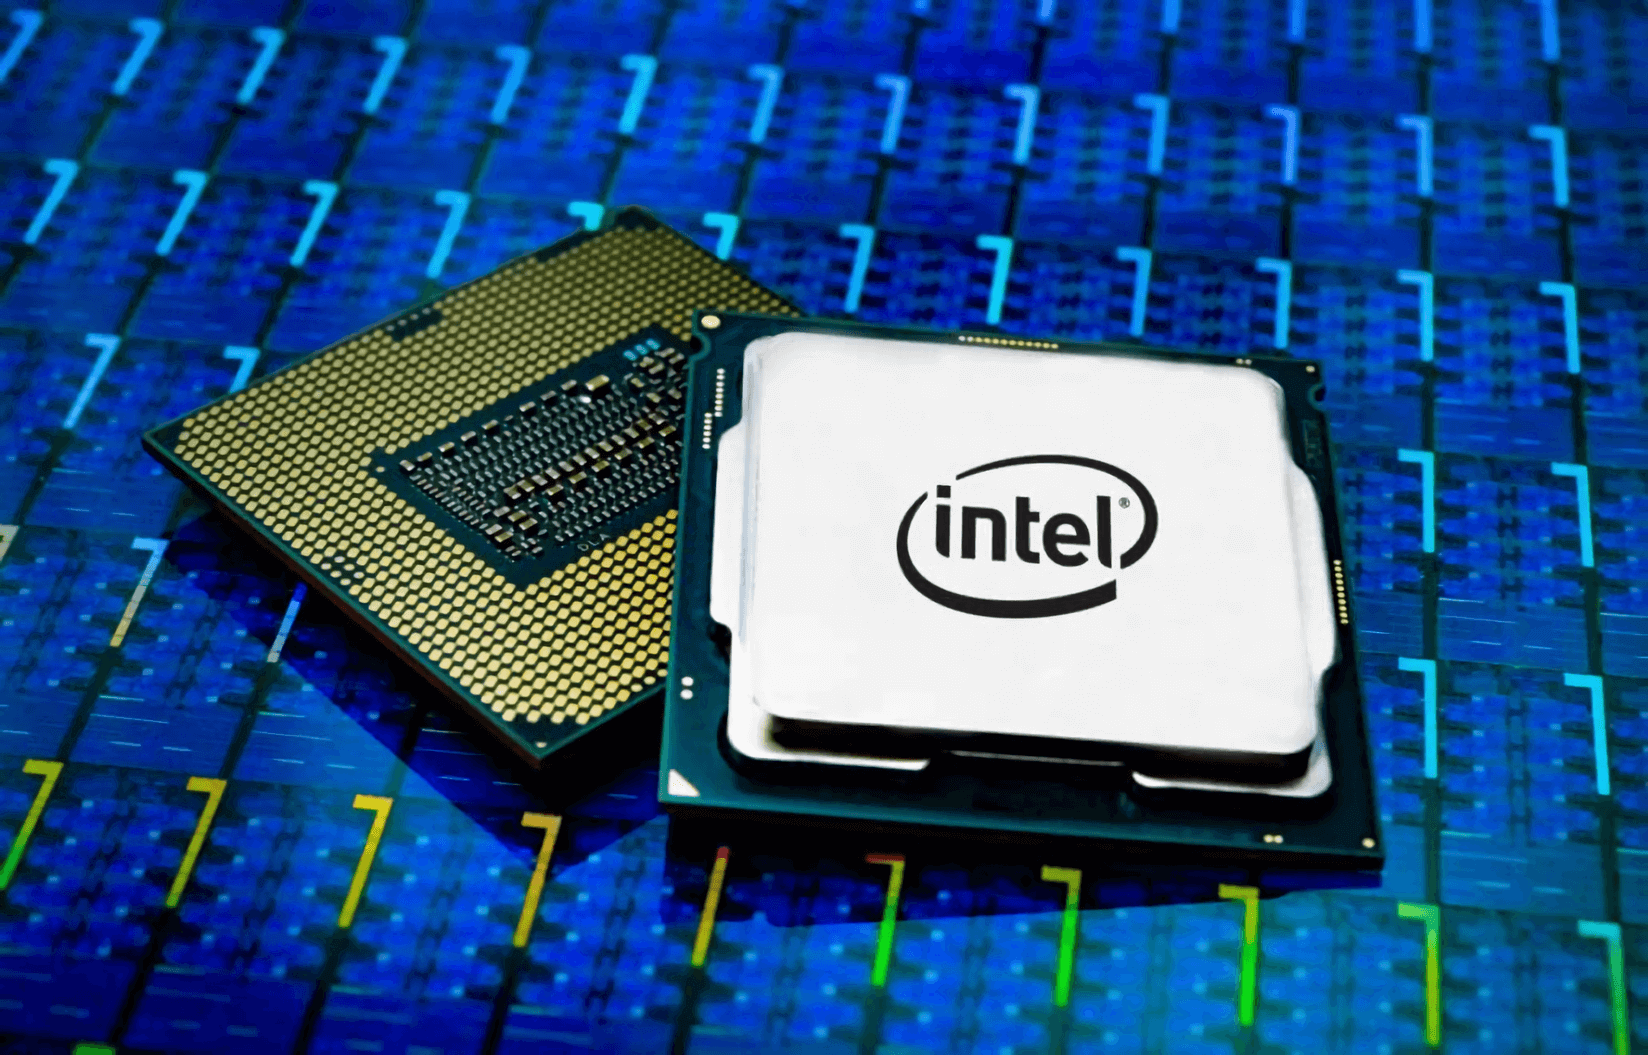 Intel Comet Lake processors may have up to 10 cores